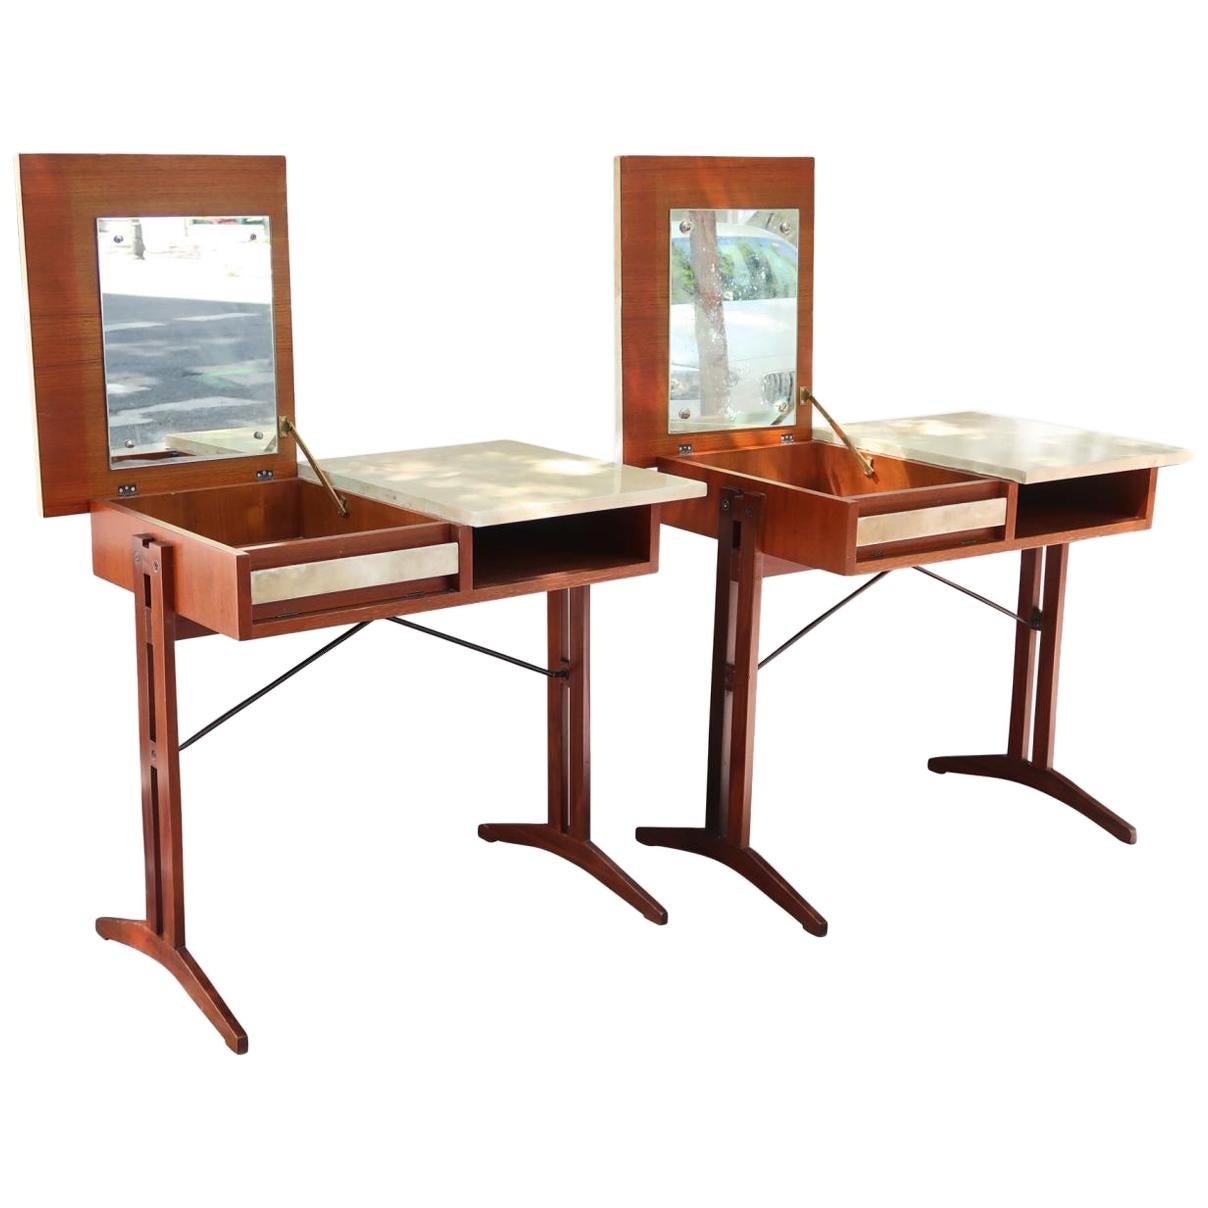 Pair of Teak, Lacquered Parchment and Glass Midcentury Dressers, Italy 1960